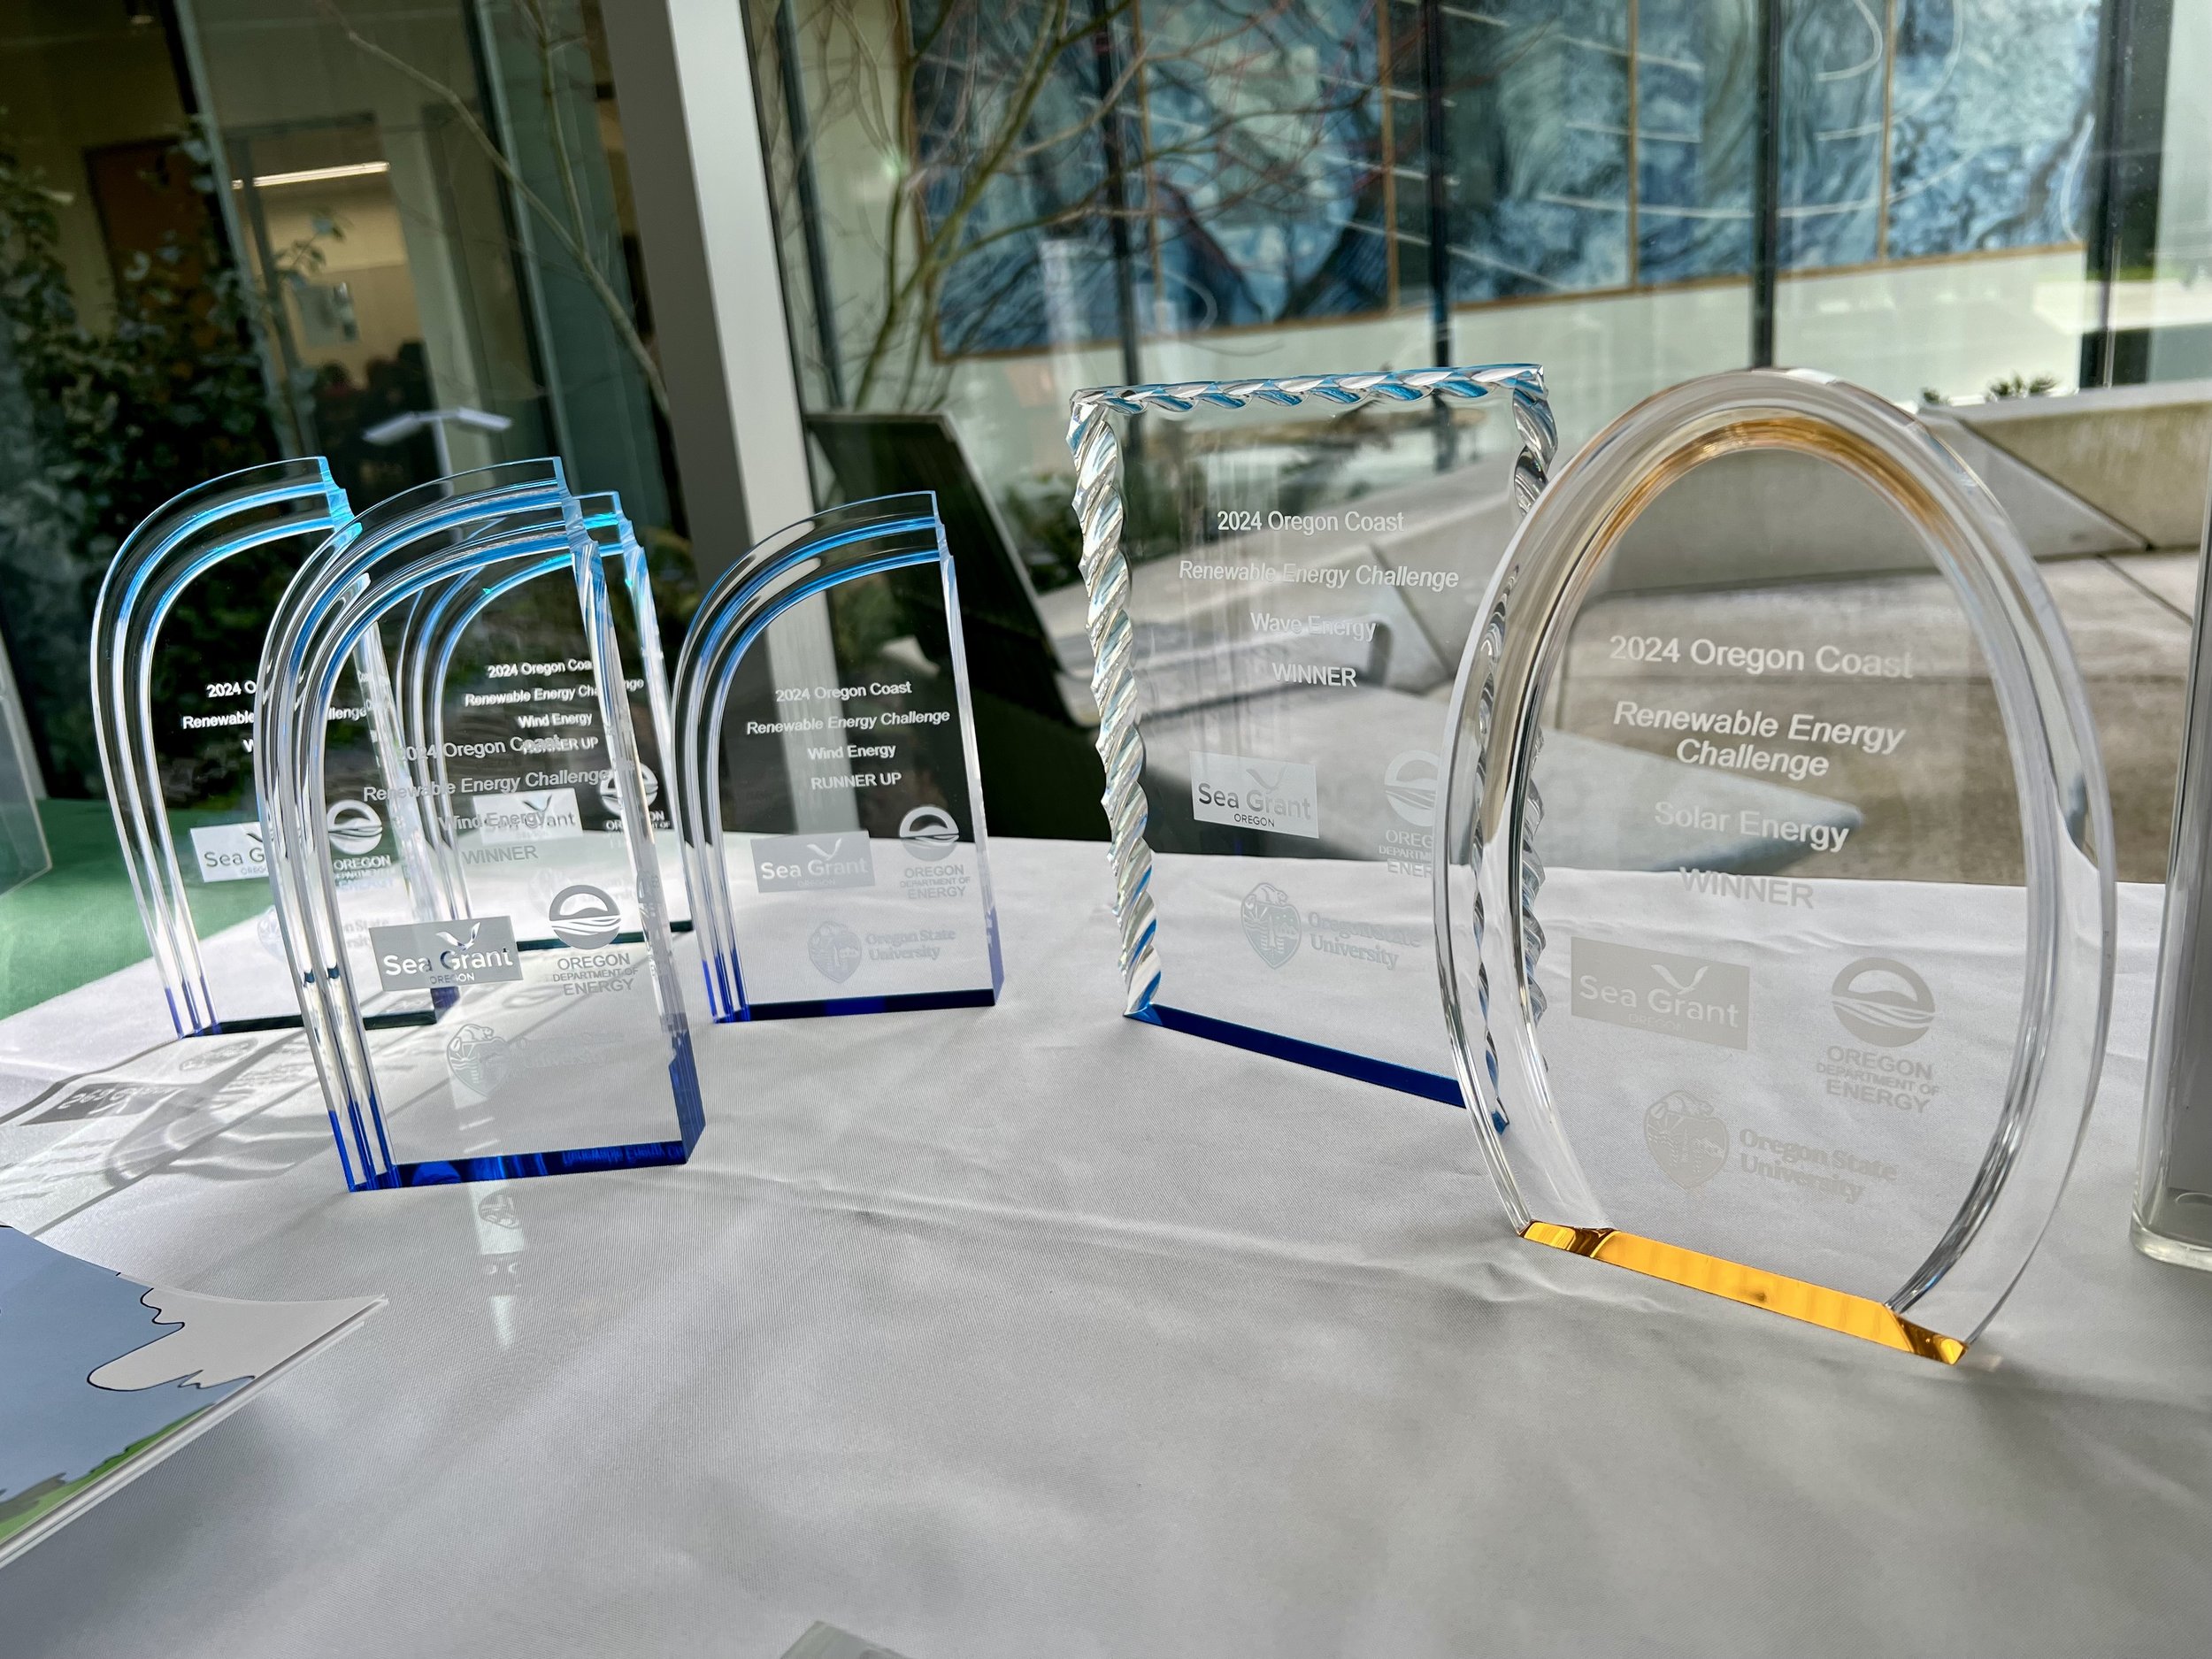 ODOE was proud to sponsor the event. Check out the awards the winning teams took home!